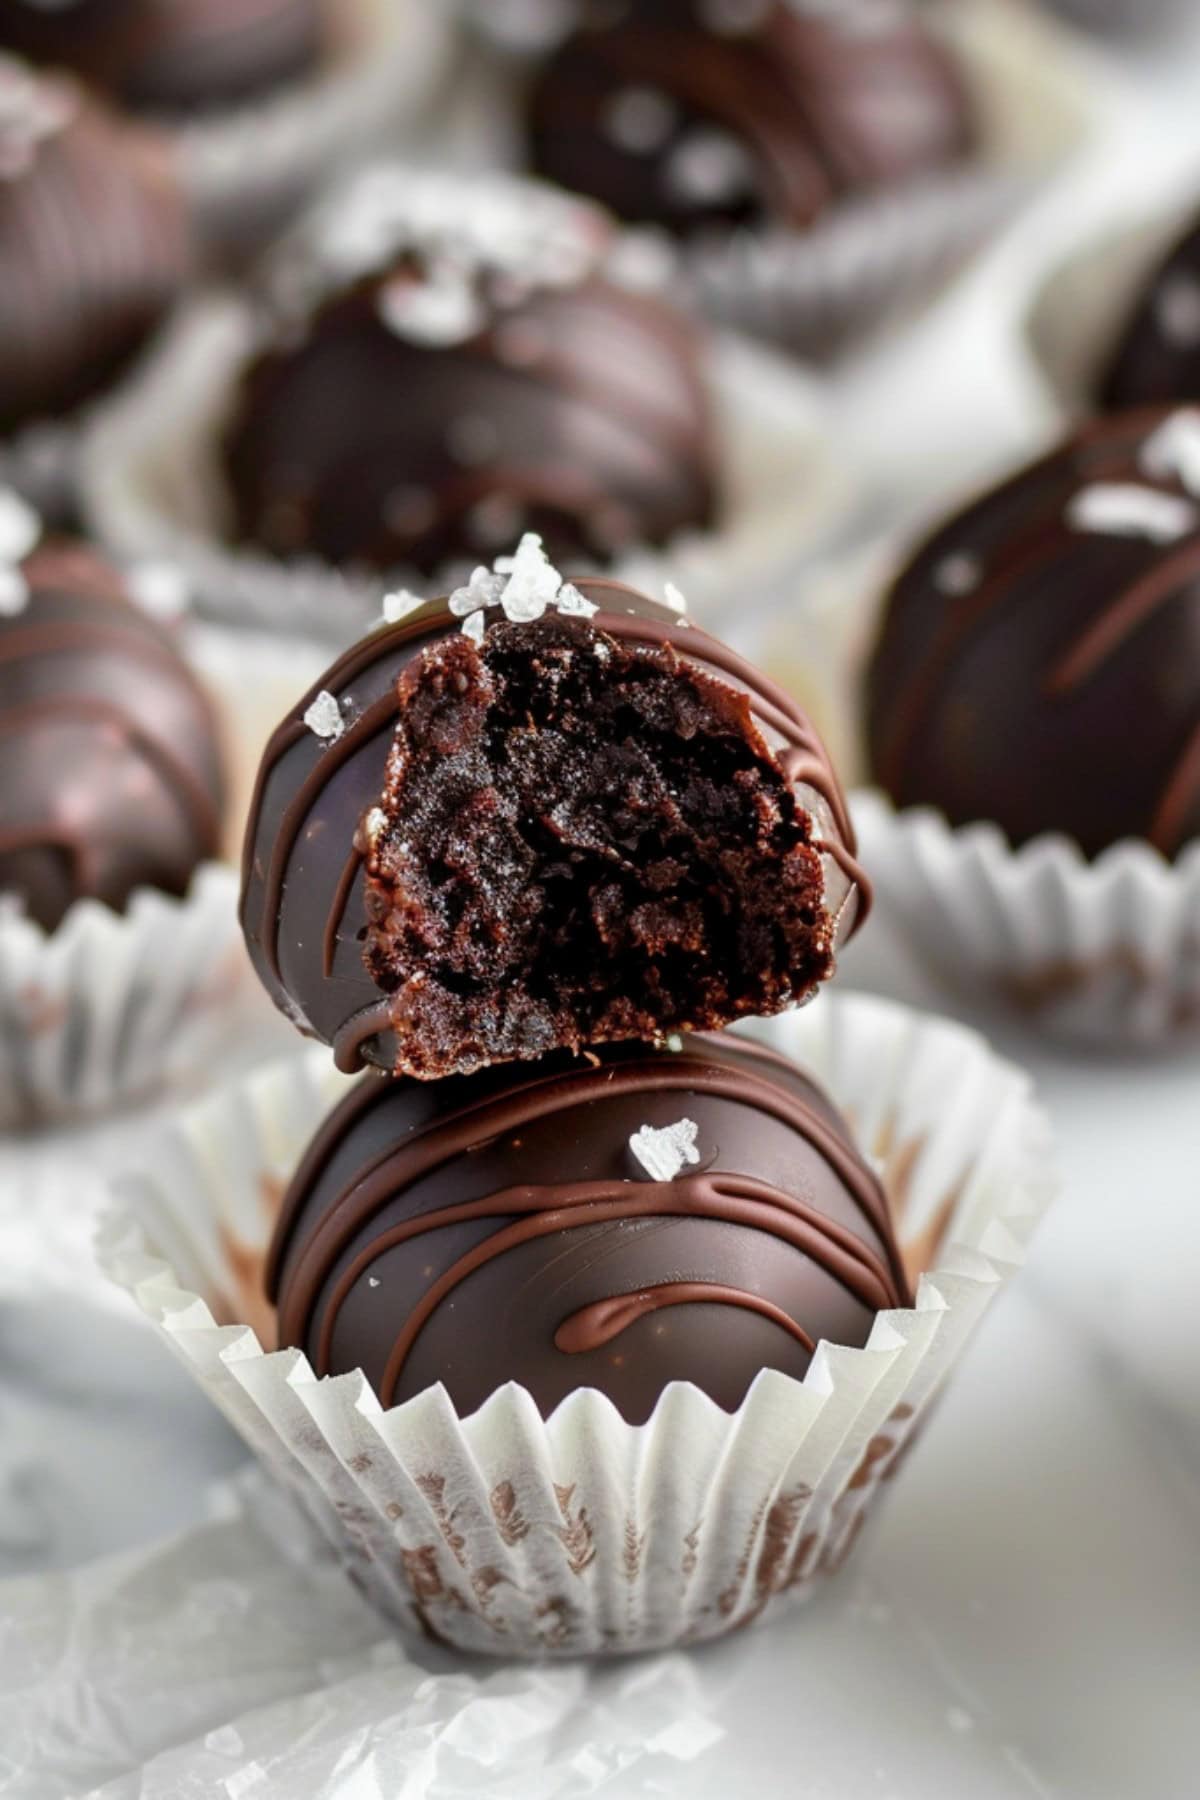 Decadent and fudgy homemade brownie truffles topped with sea salt placed in paper cups on a white marble countertop